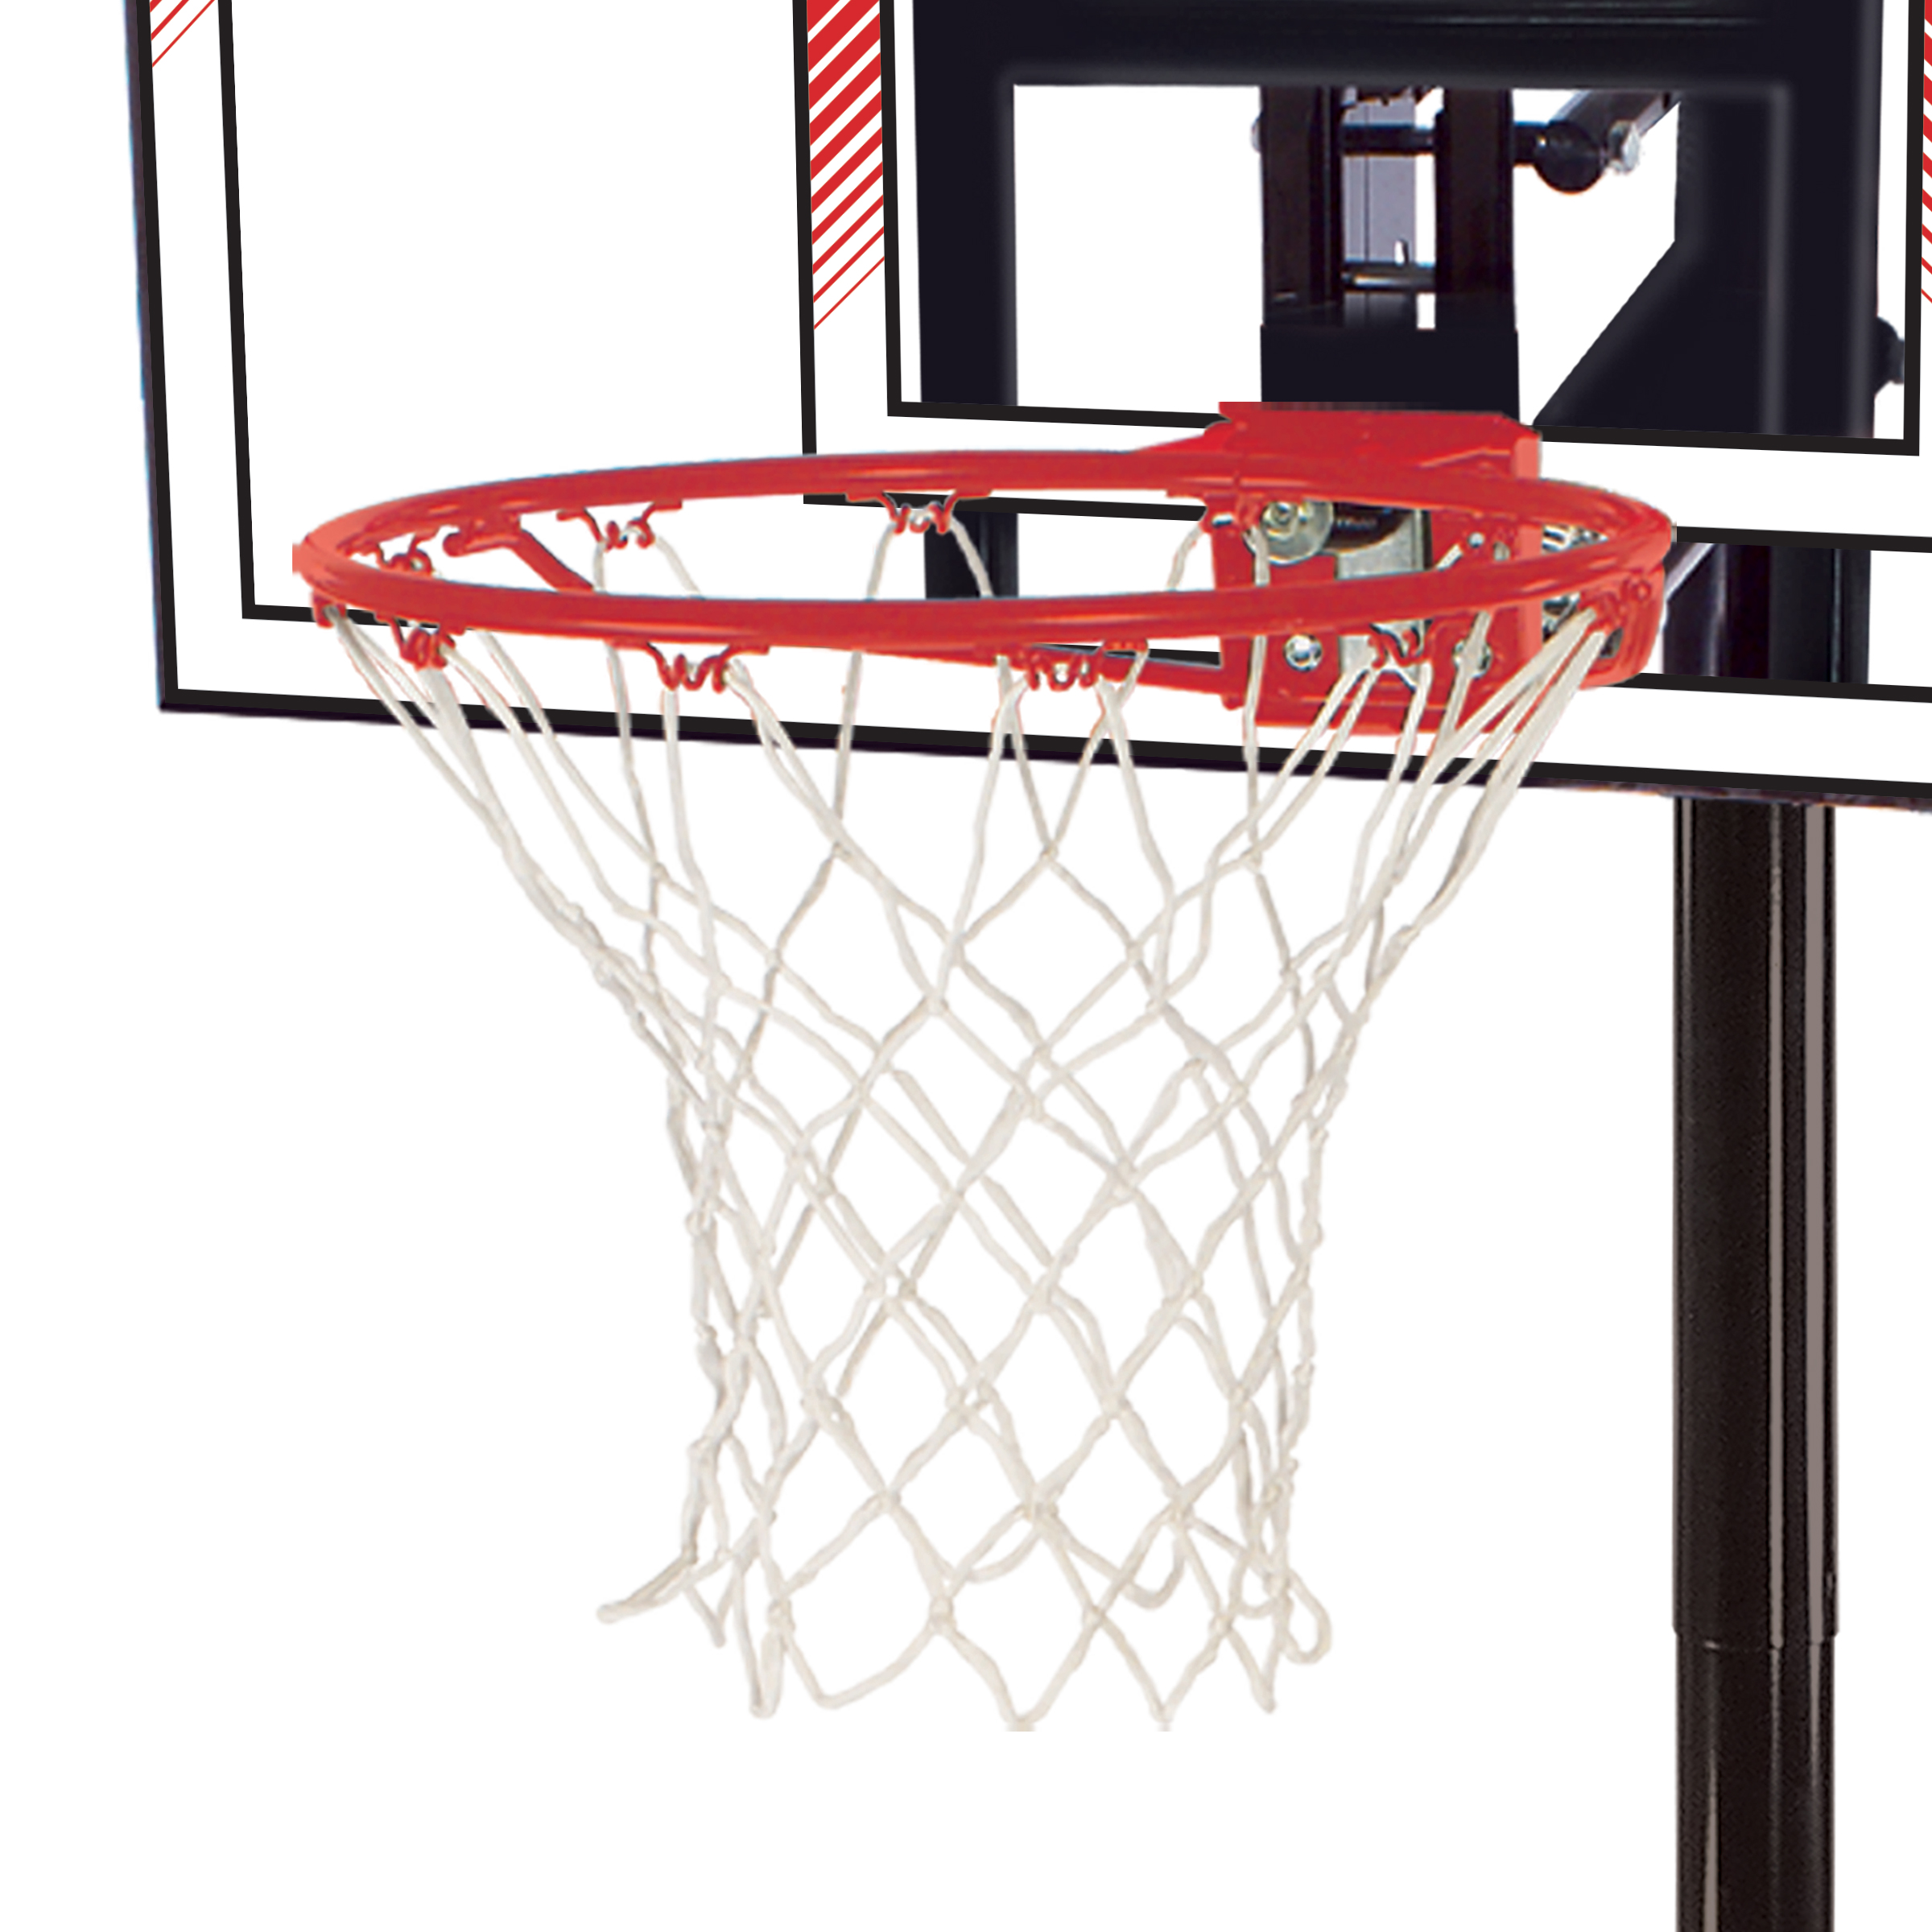 Spalding Ratchet Lift 44 In. Polycarbonate Portable Basketball Hoop System - image 4 of 6